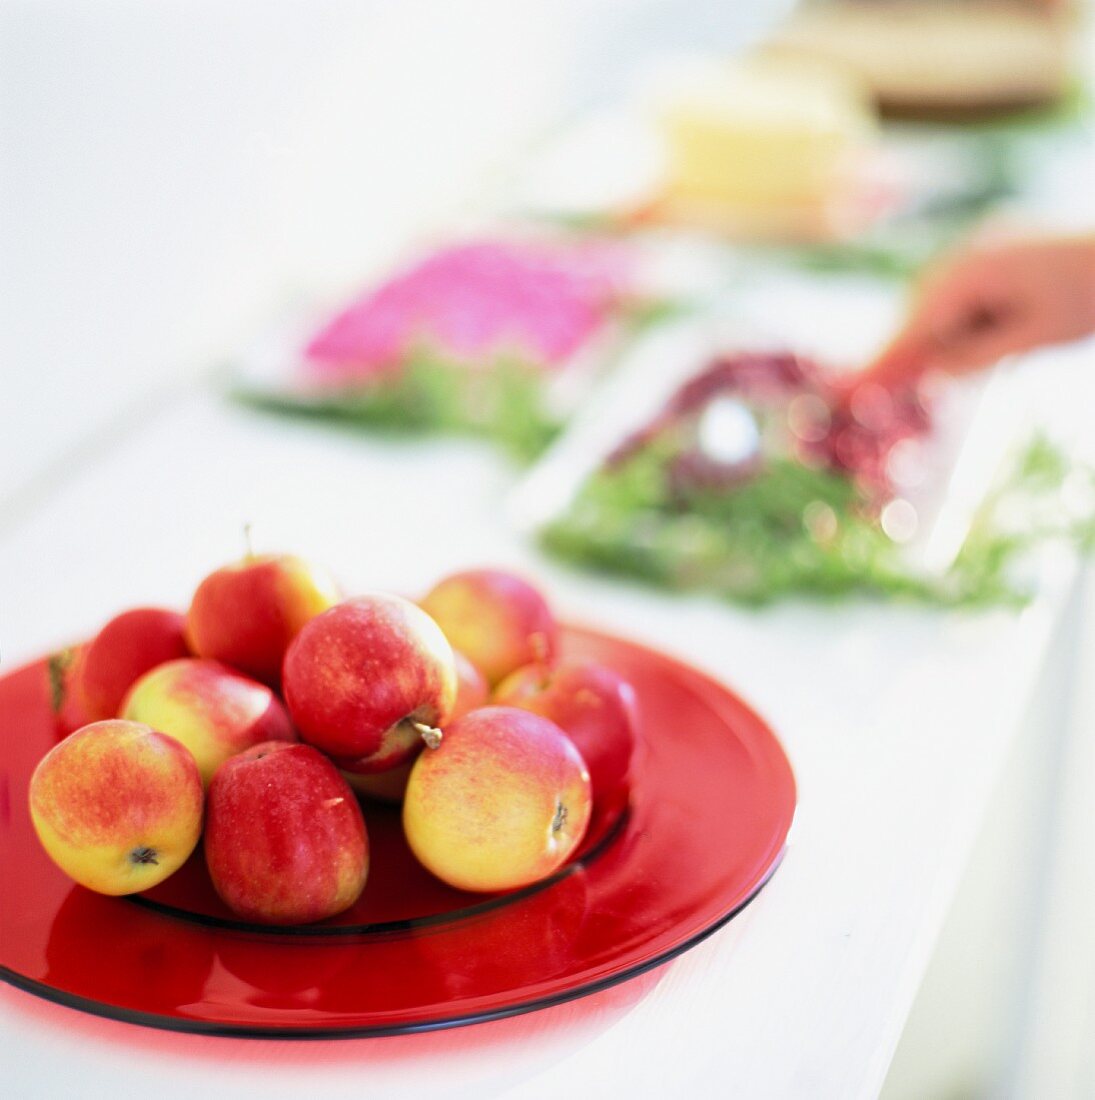 Fresh apples on a red plate